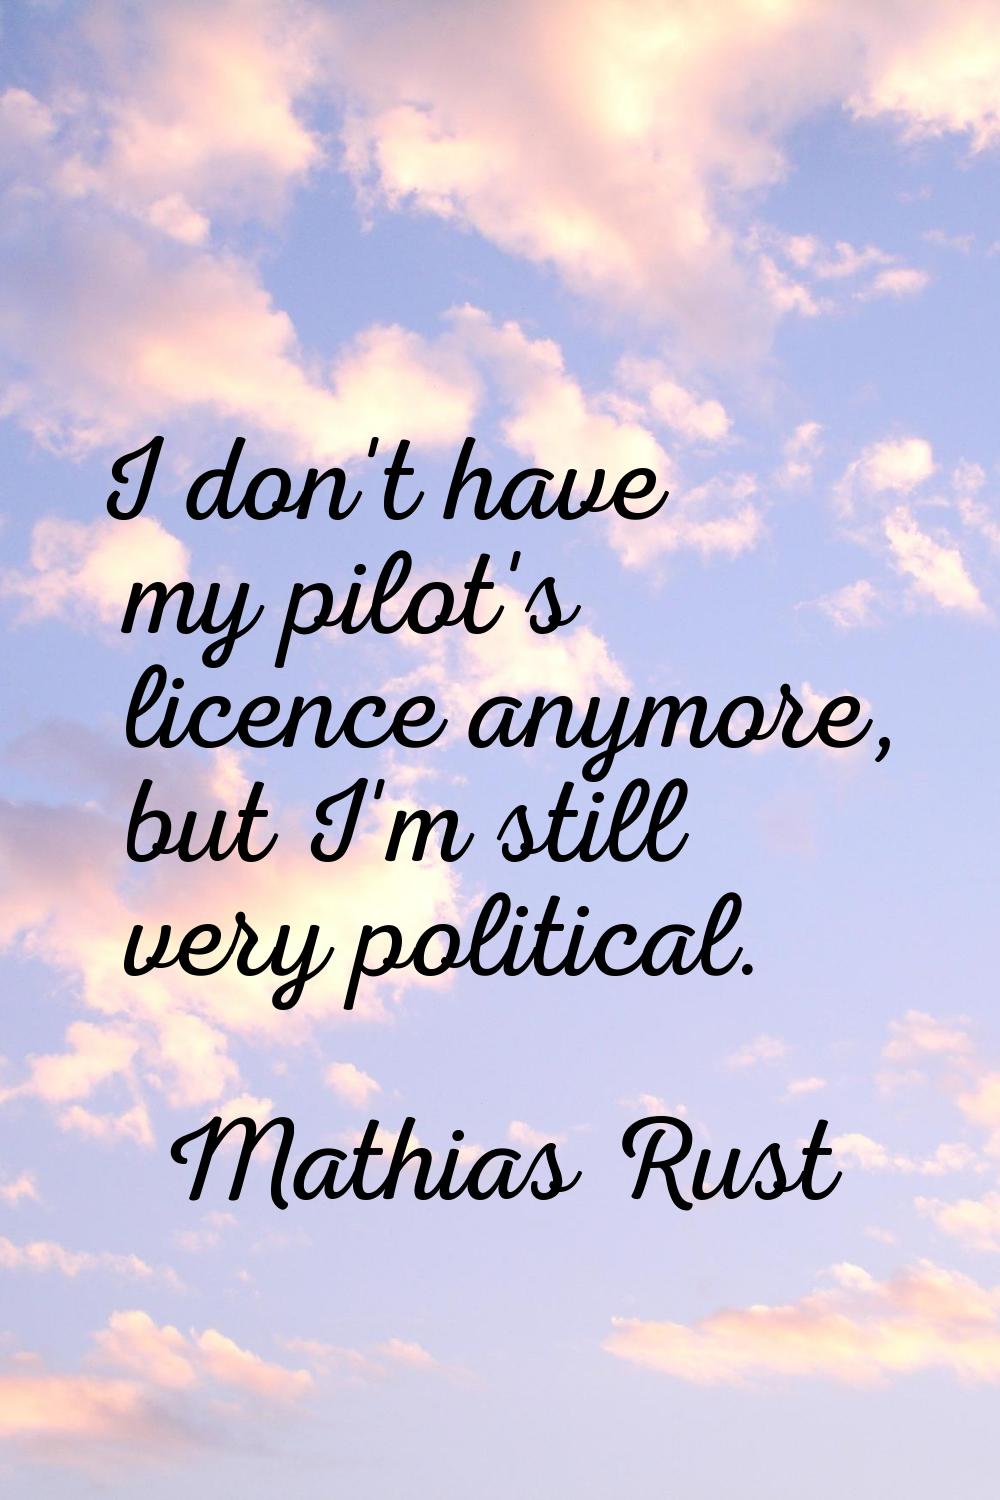 I don't have my pilot's licence anymore, but I'm still very political.